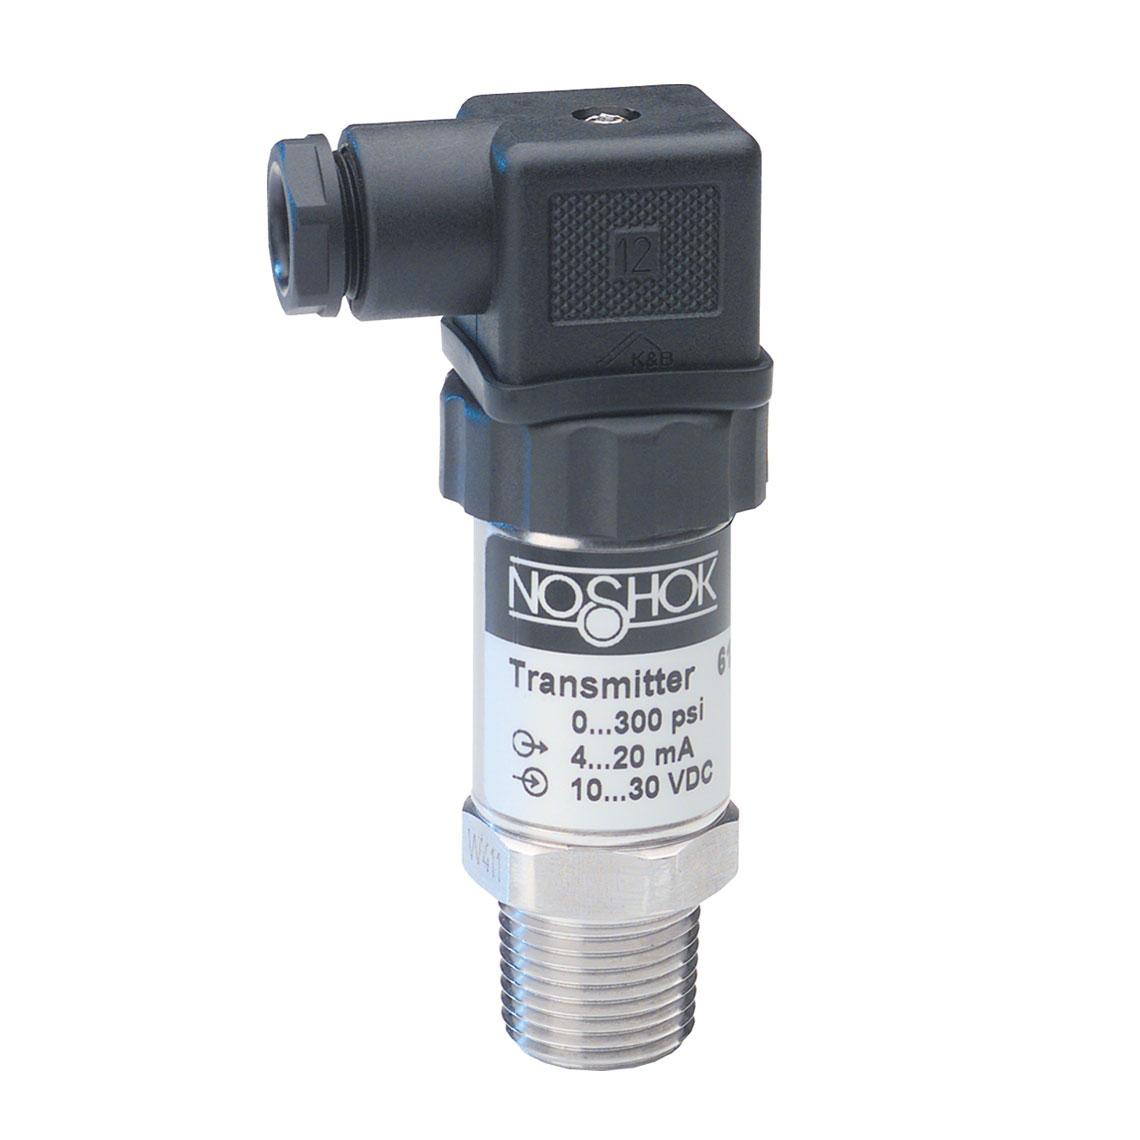 Noshok 615-10-2-1-8-8-ST8 0 to 10 psig, 0.125% Accuracy (Best Fit Straight Line (BFSL)), 4 to 20 mA Output, 1/2'' National Pipe Thread (NPT) Male Pressure Transducer with DIN EN 175301-803 Form A Electrical Connection and 0.8 mm Stainless Steel Threaded Orifice